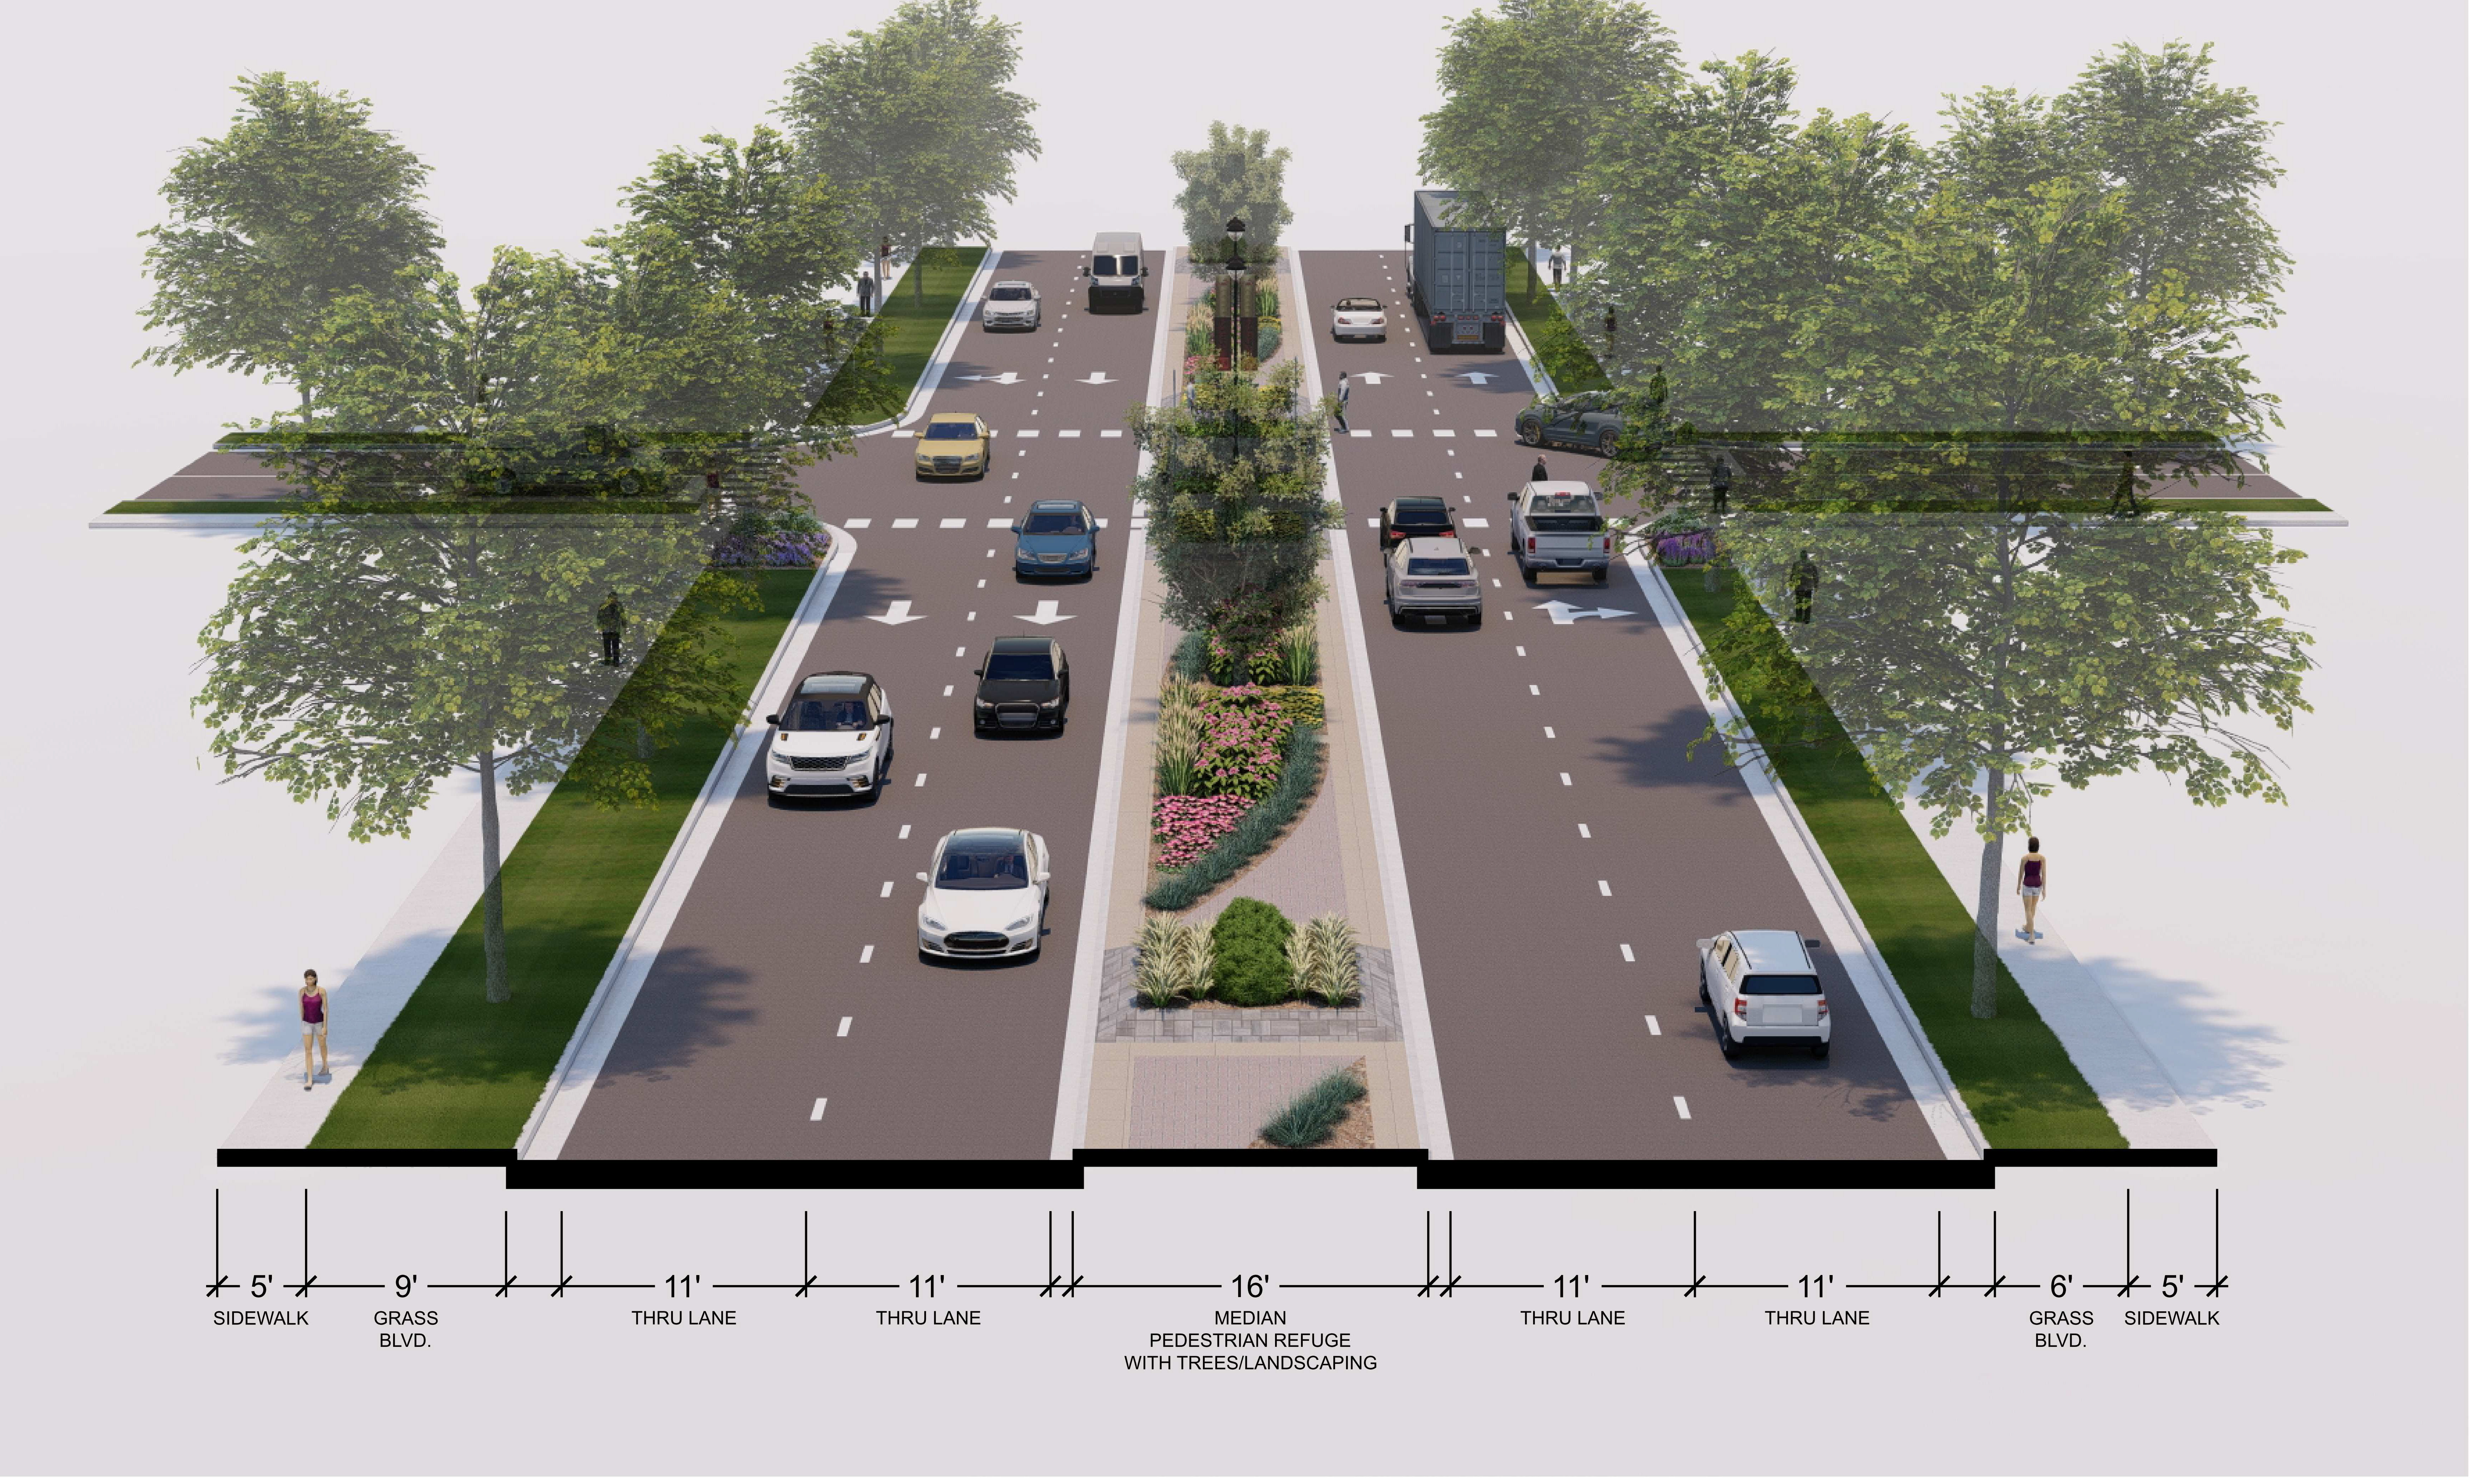 Rendering at intersection with median showing improved pedestrian crossing.